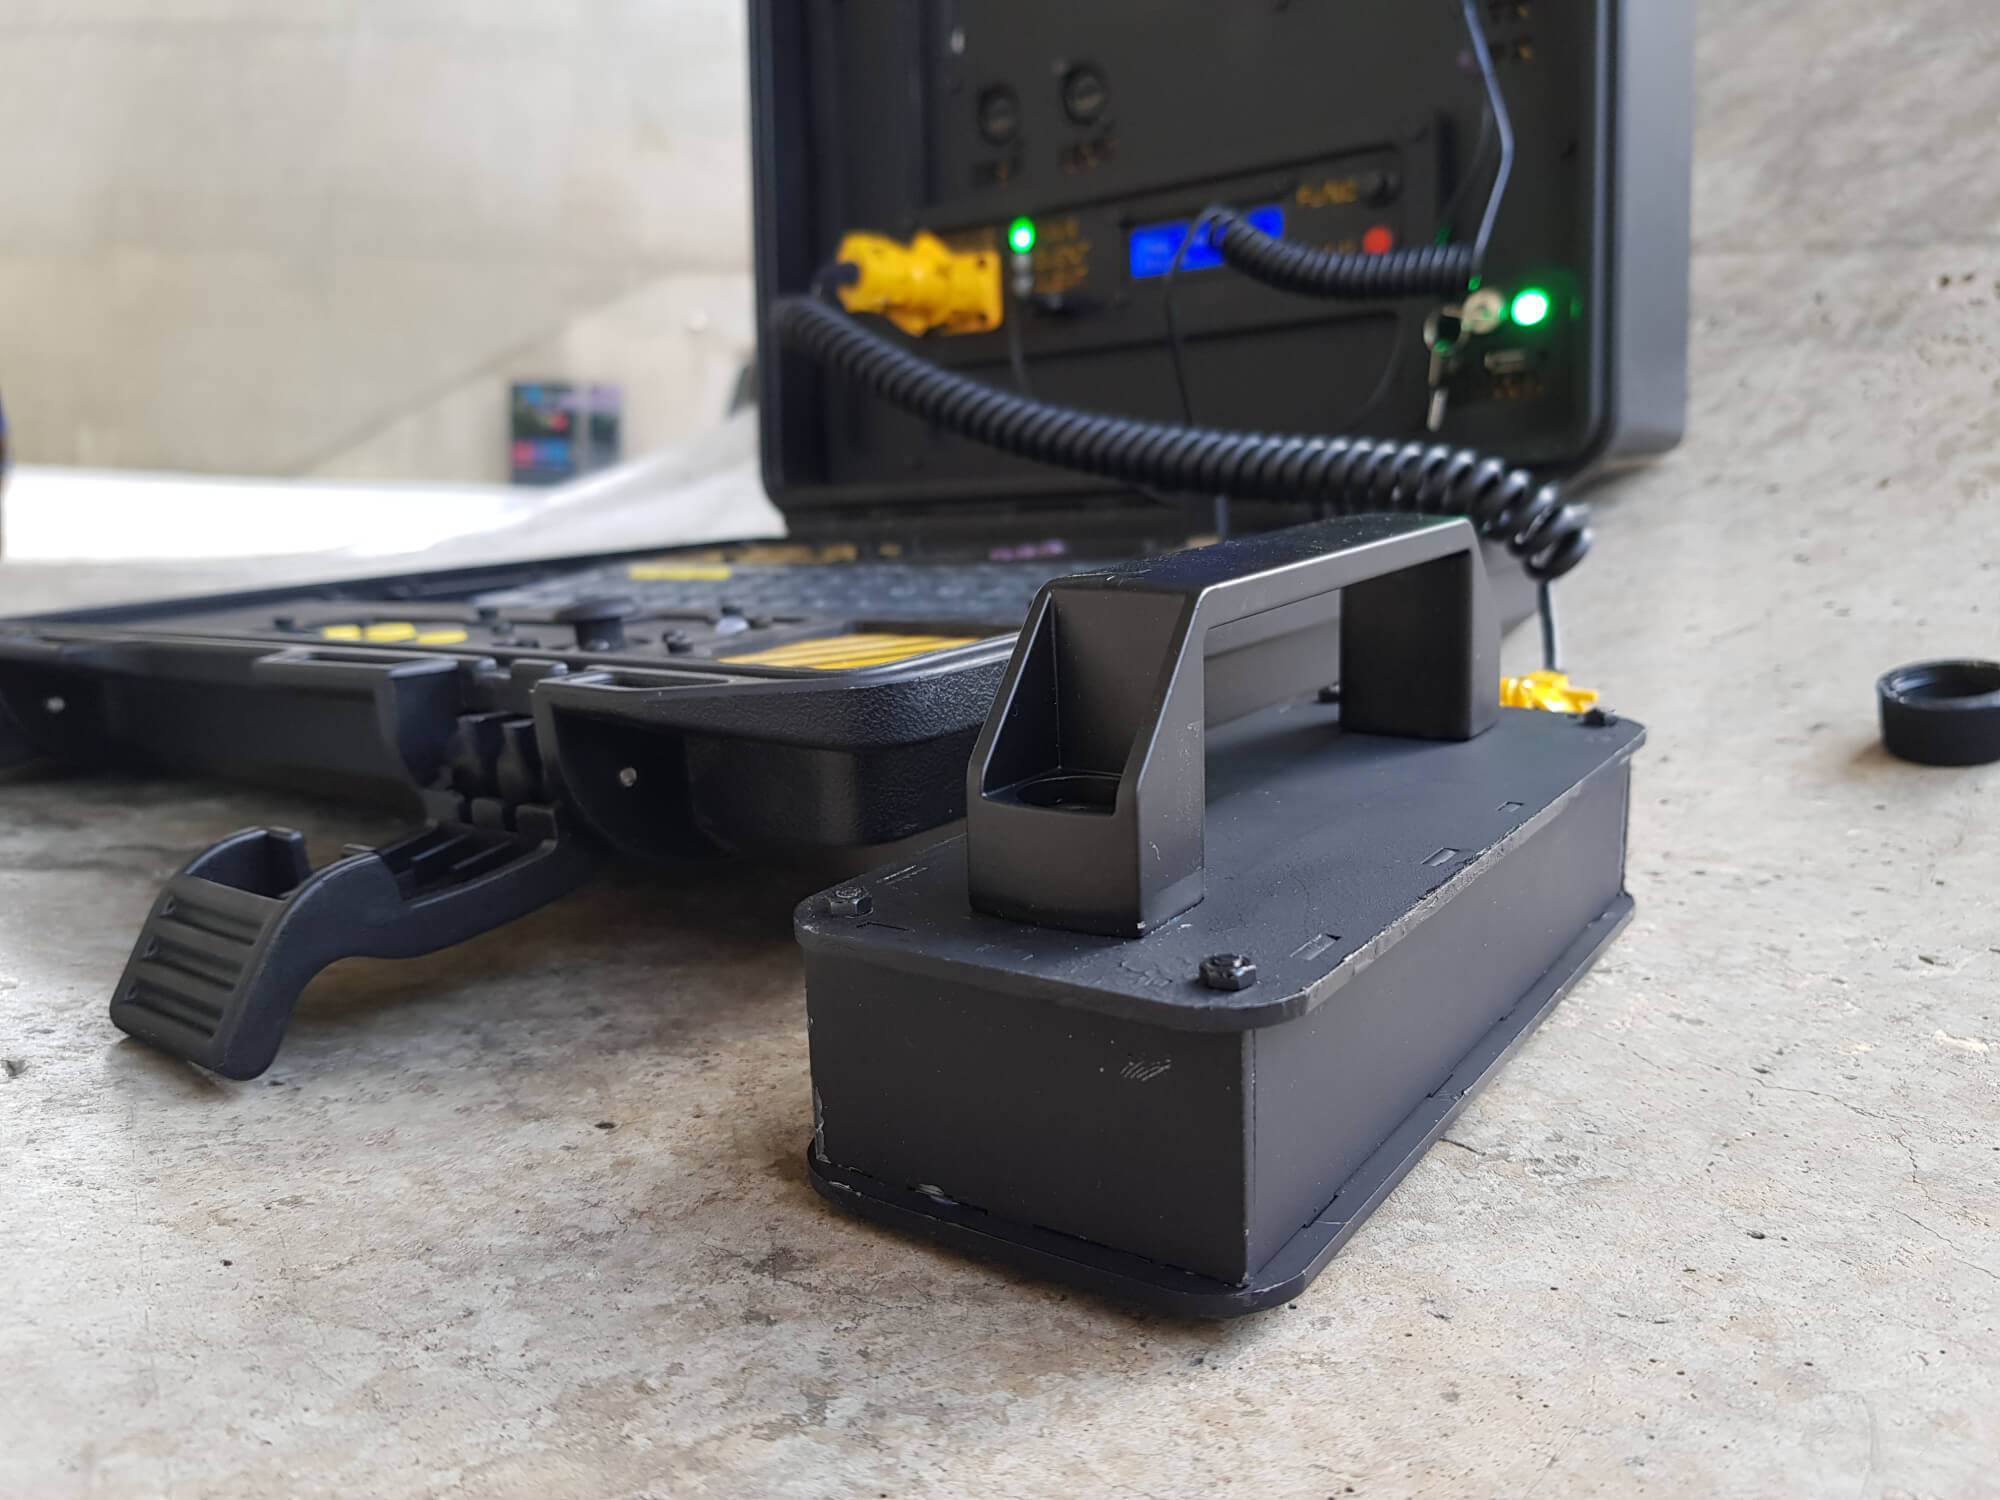 A military-looking cyberdeck with a built-in Geiger counter